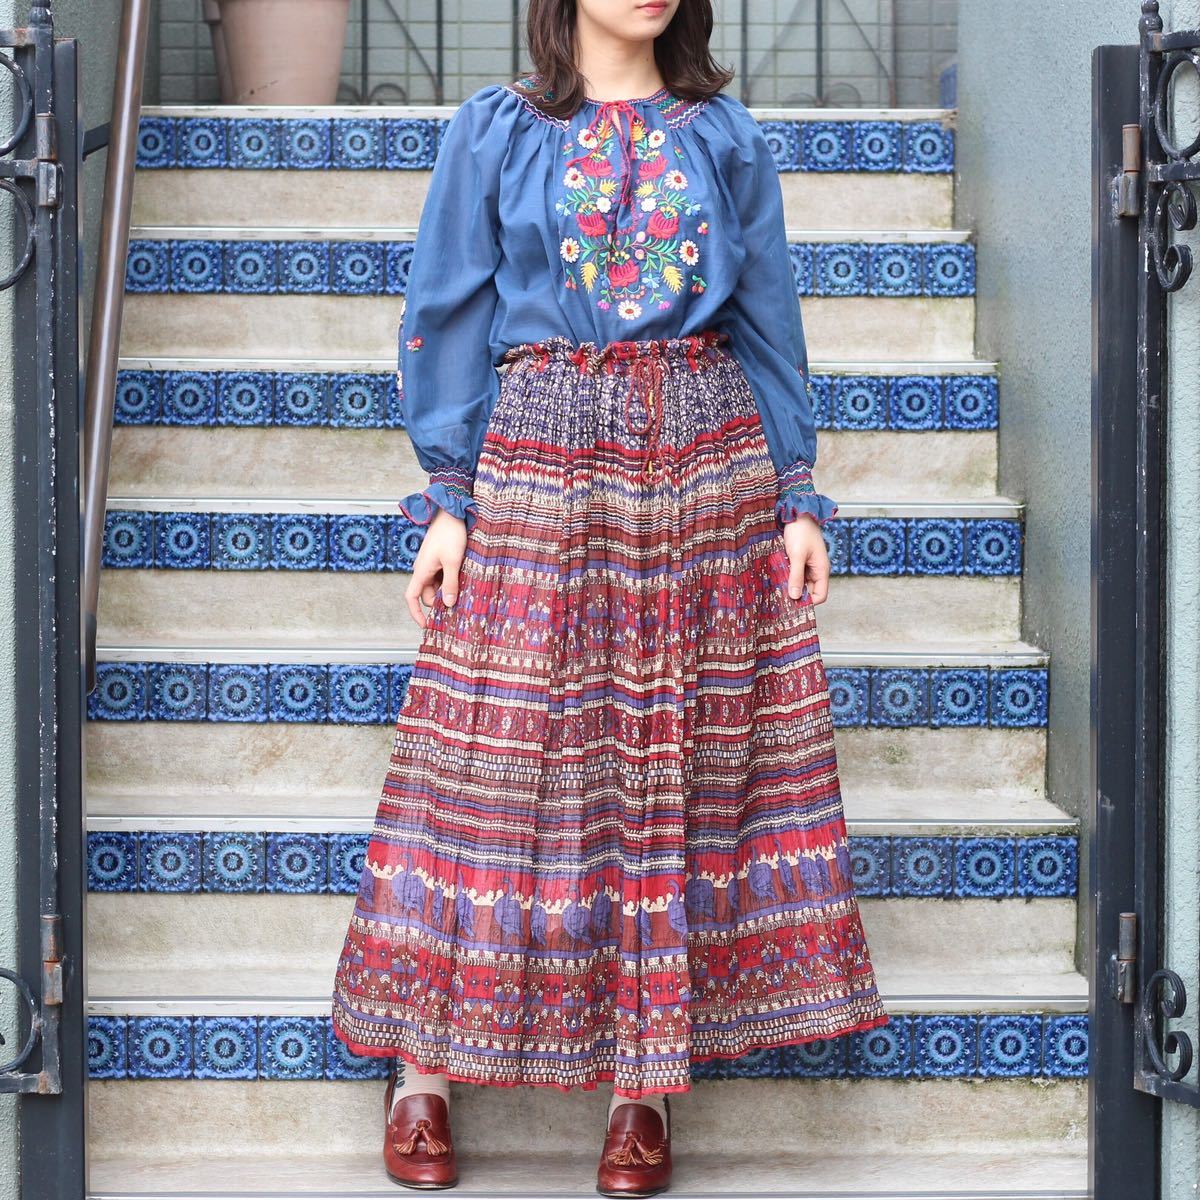 USA VINTAGE ETHNIC PATTERNED LONG SKIRT/アメリカ古着エスニック柄